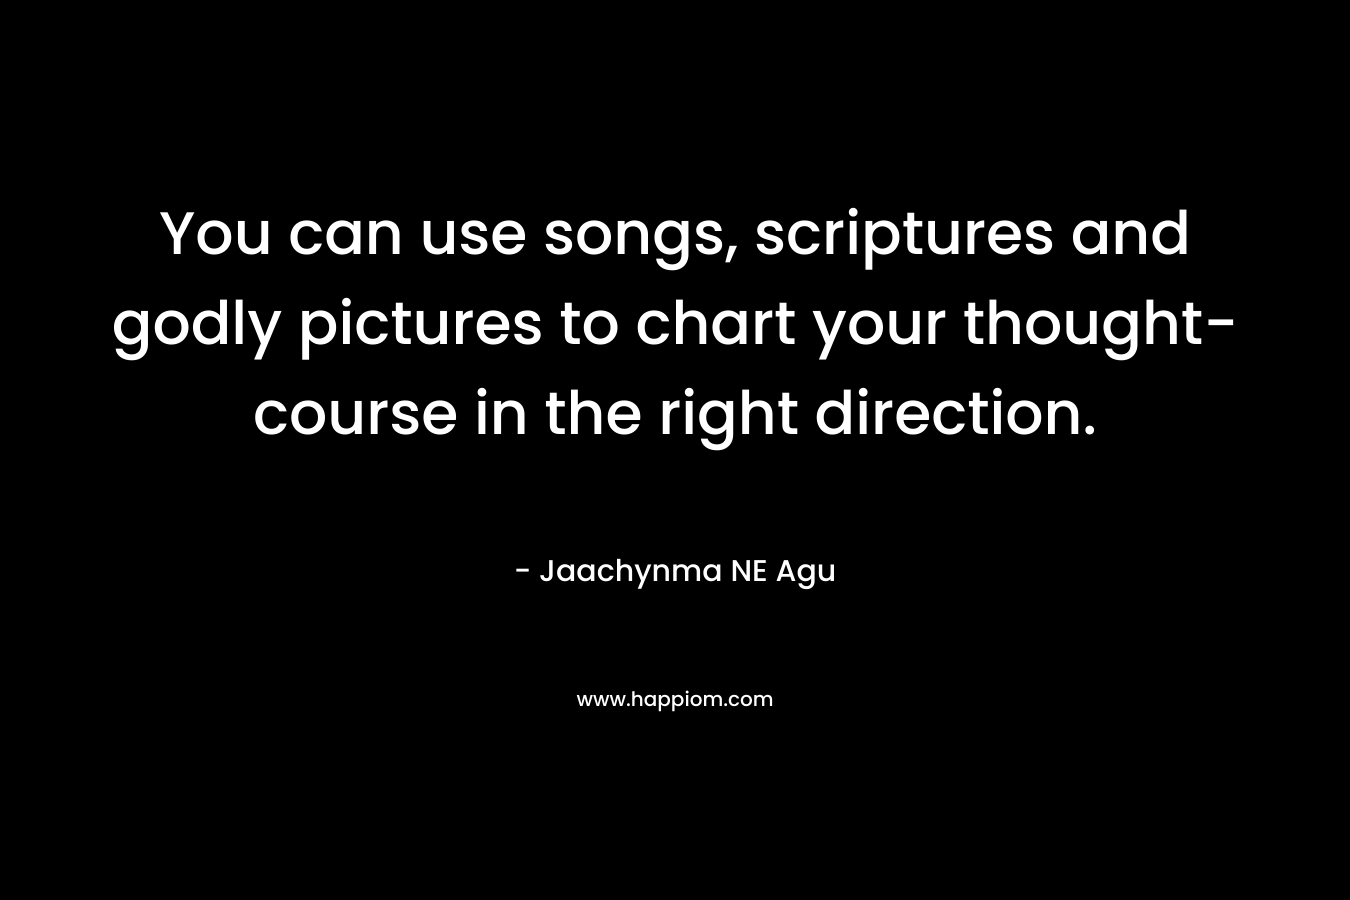 You can use songs, scriptures and godly pictures to chart your thought-course in the right direction.